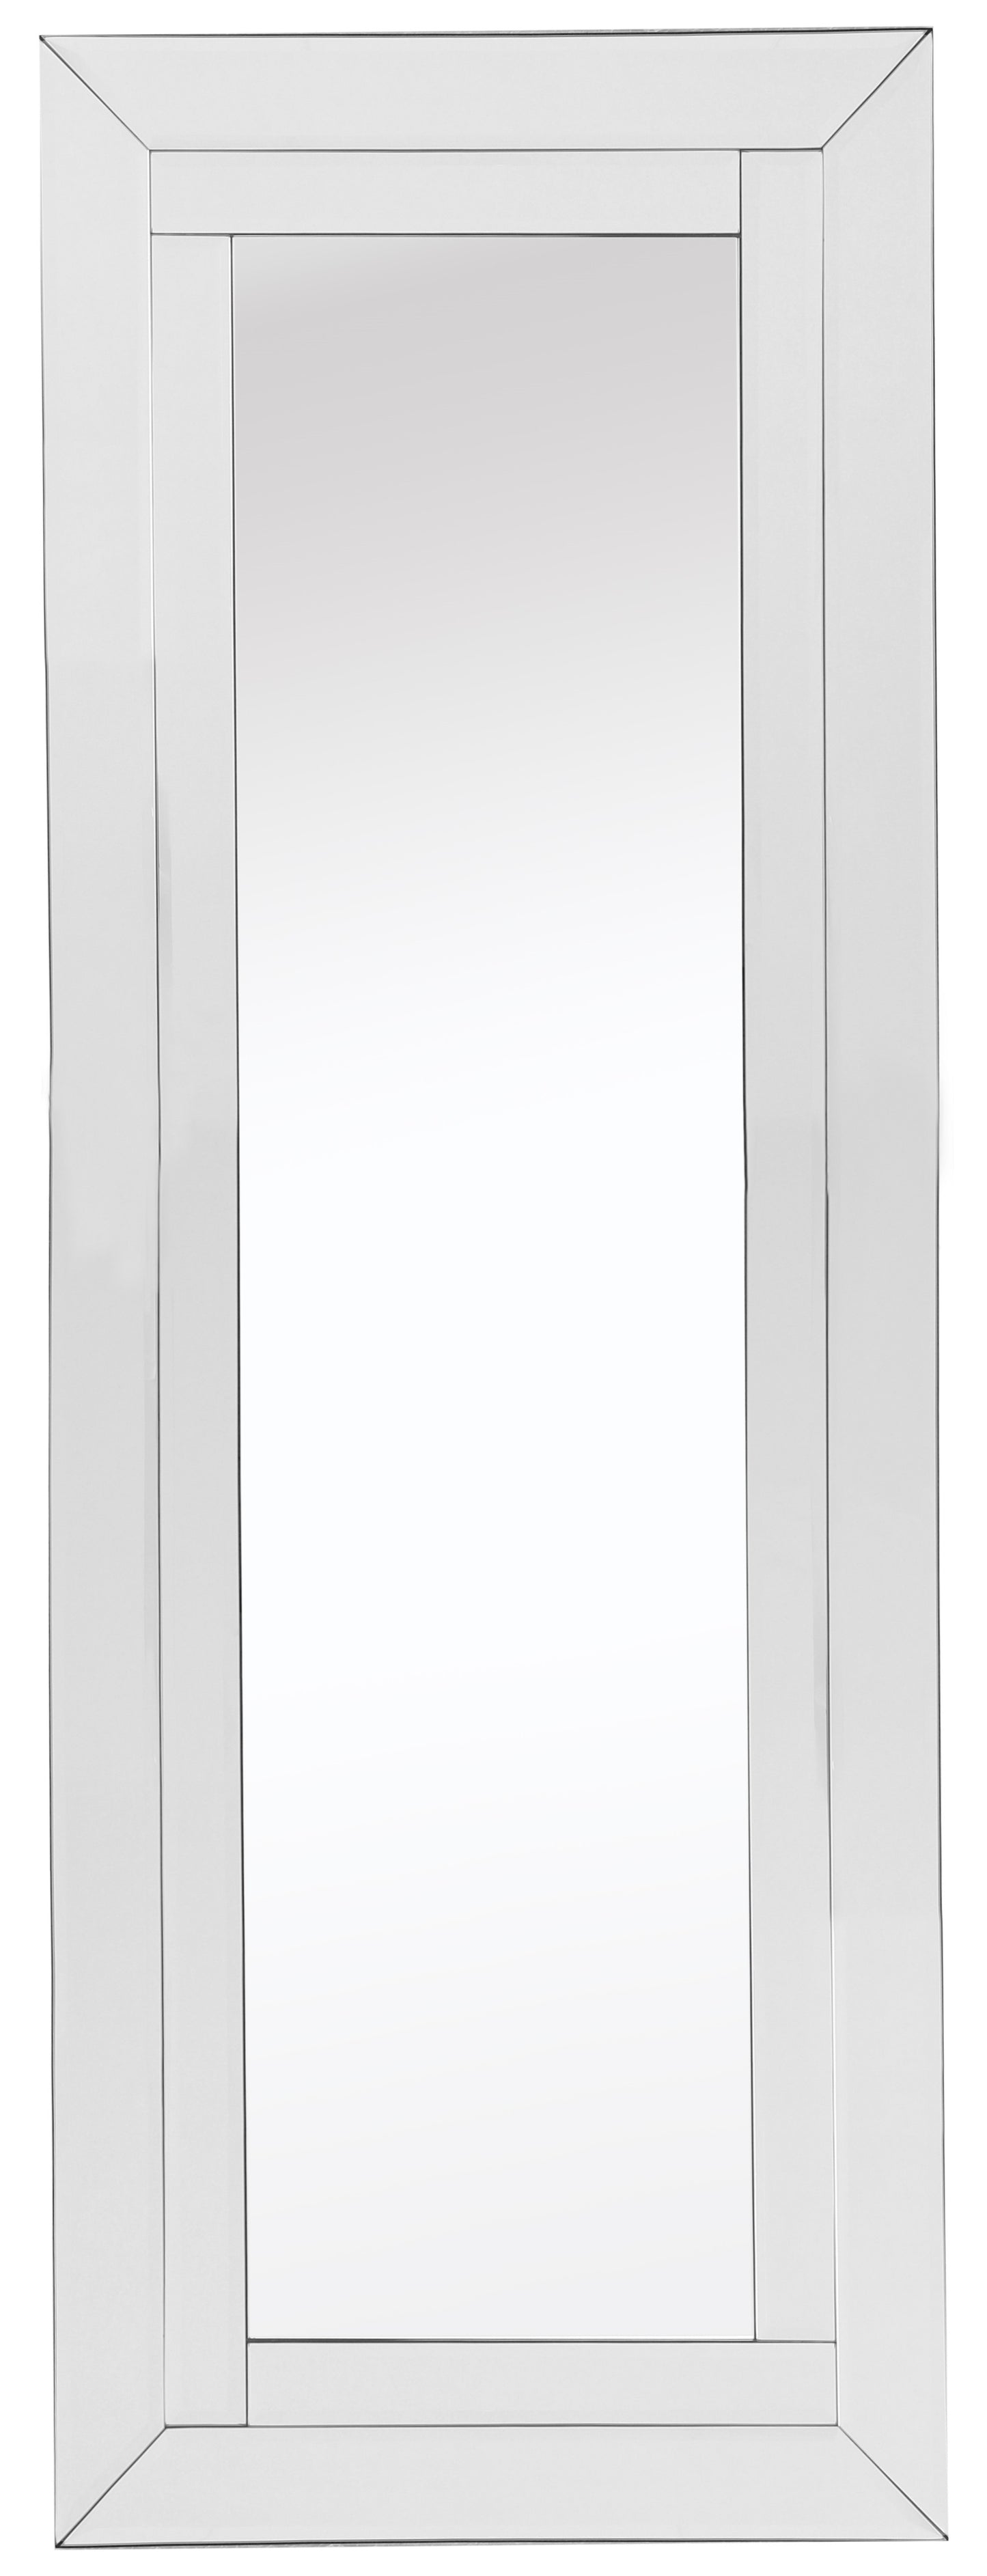 Clear Rectangle Full Length Hanging Glass Mirror